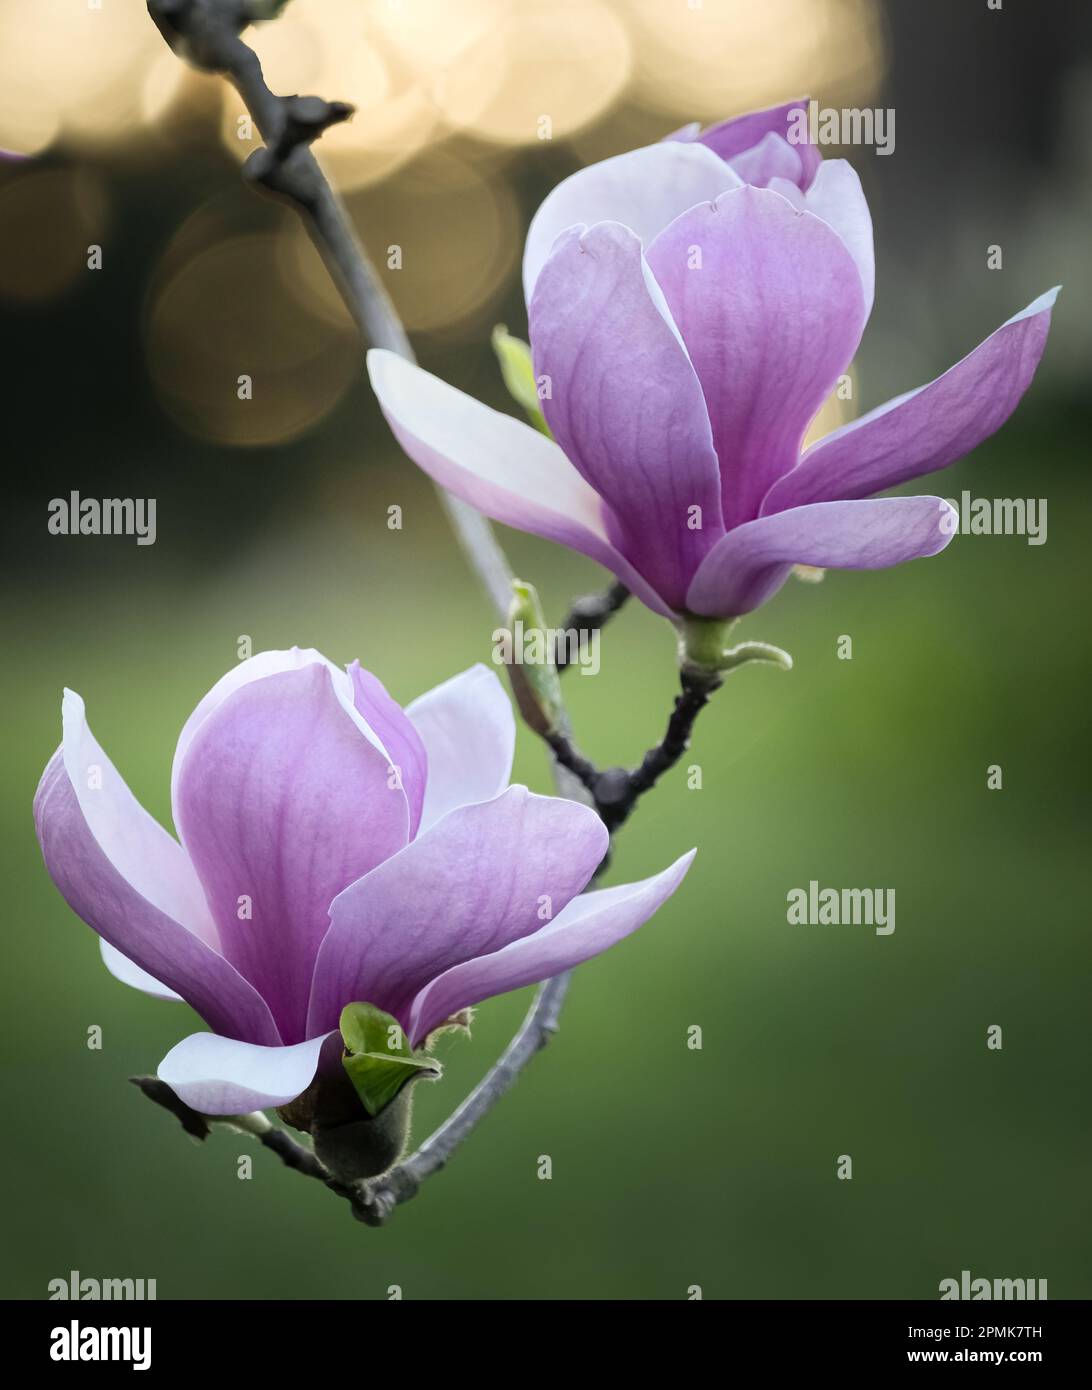 Two sunlit pink or purple magnolia tree flowers or blossoms attached to a branch with bokeh sun and grass in background, Lancaster, Pennsylvania Stock Photo